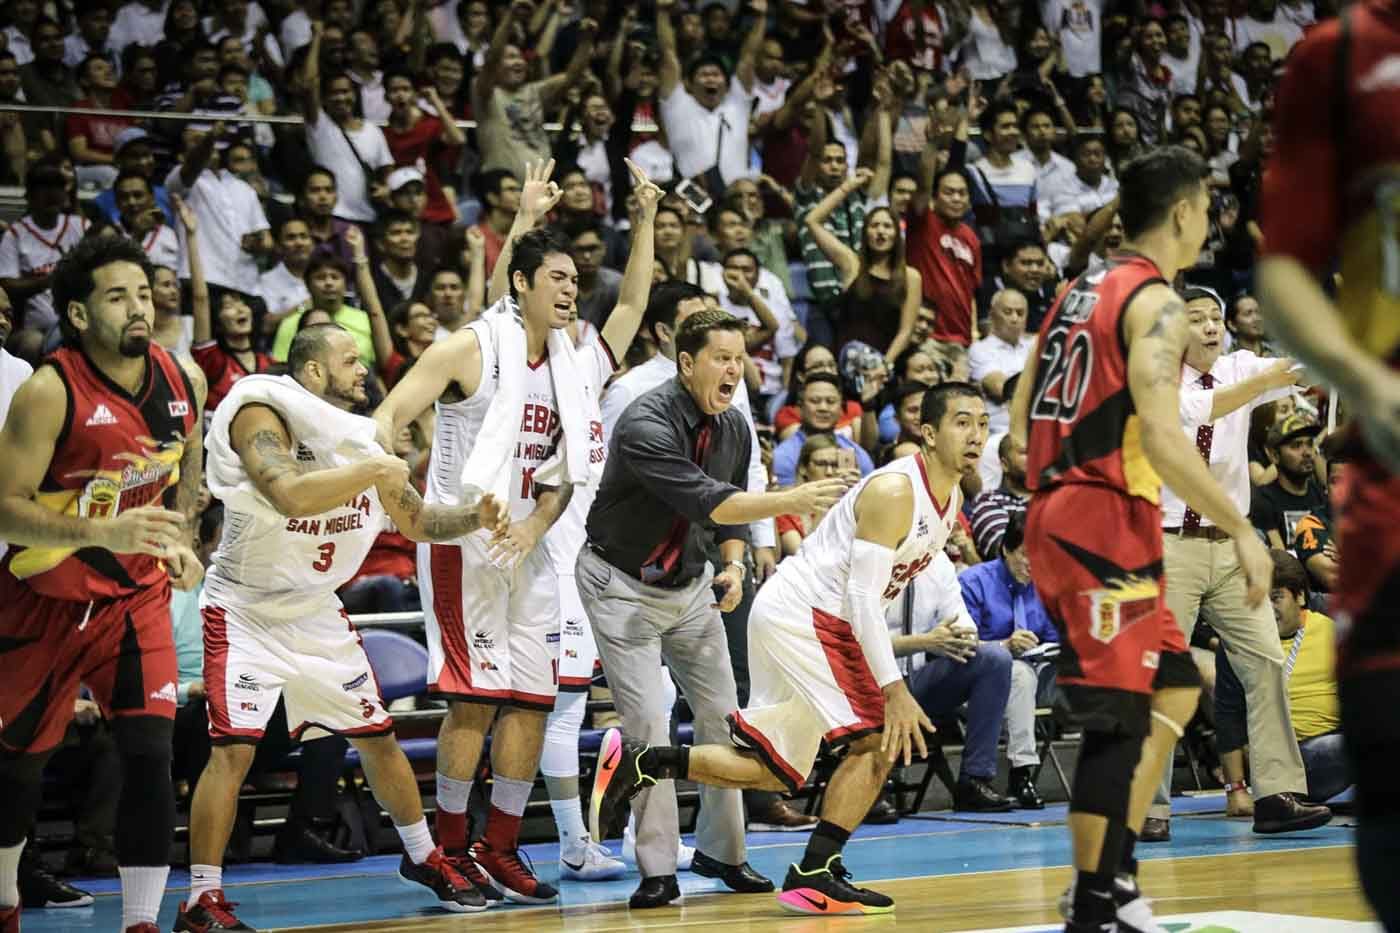 SUPPORT. The bench supporting the players on the court. Photo by Josh Albelda/Rappler 